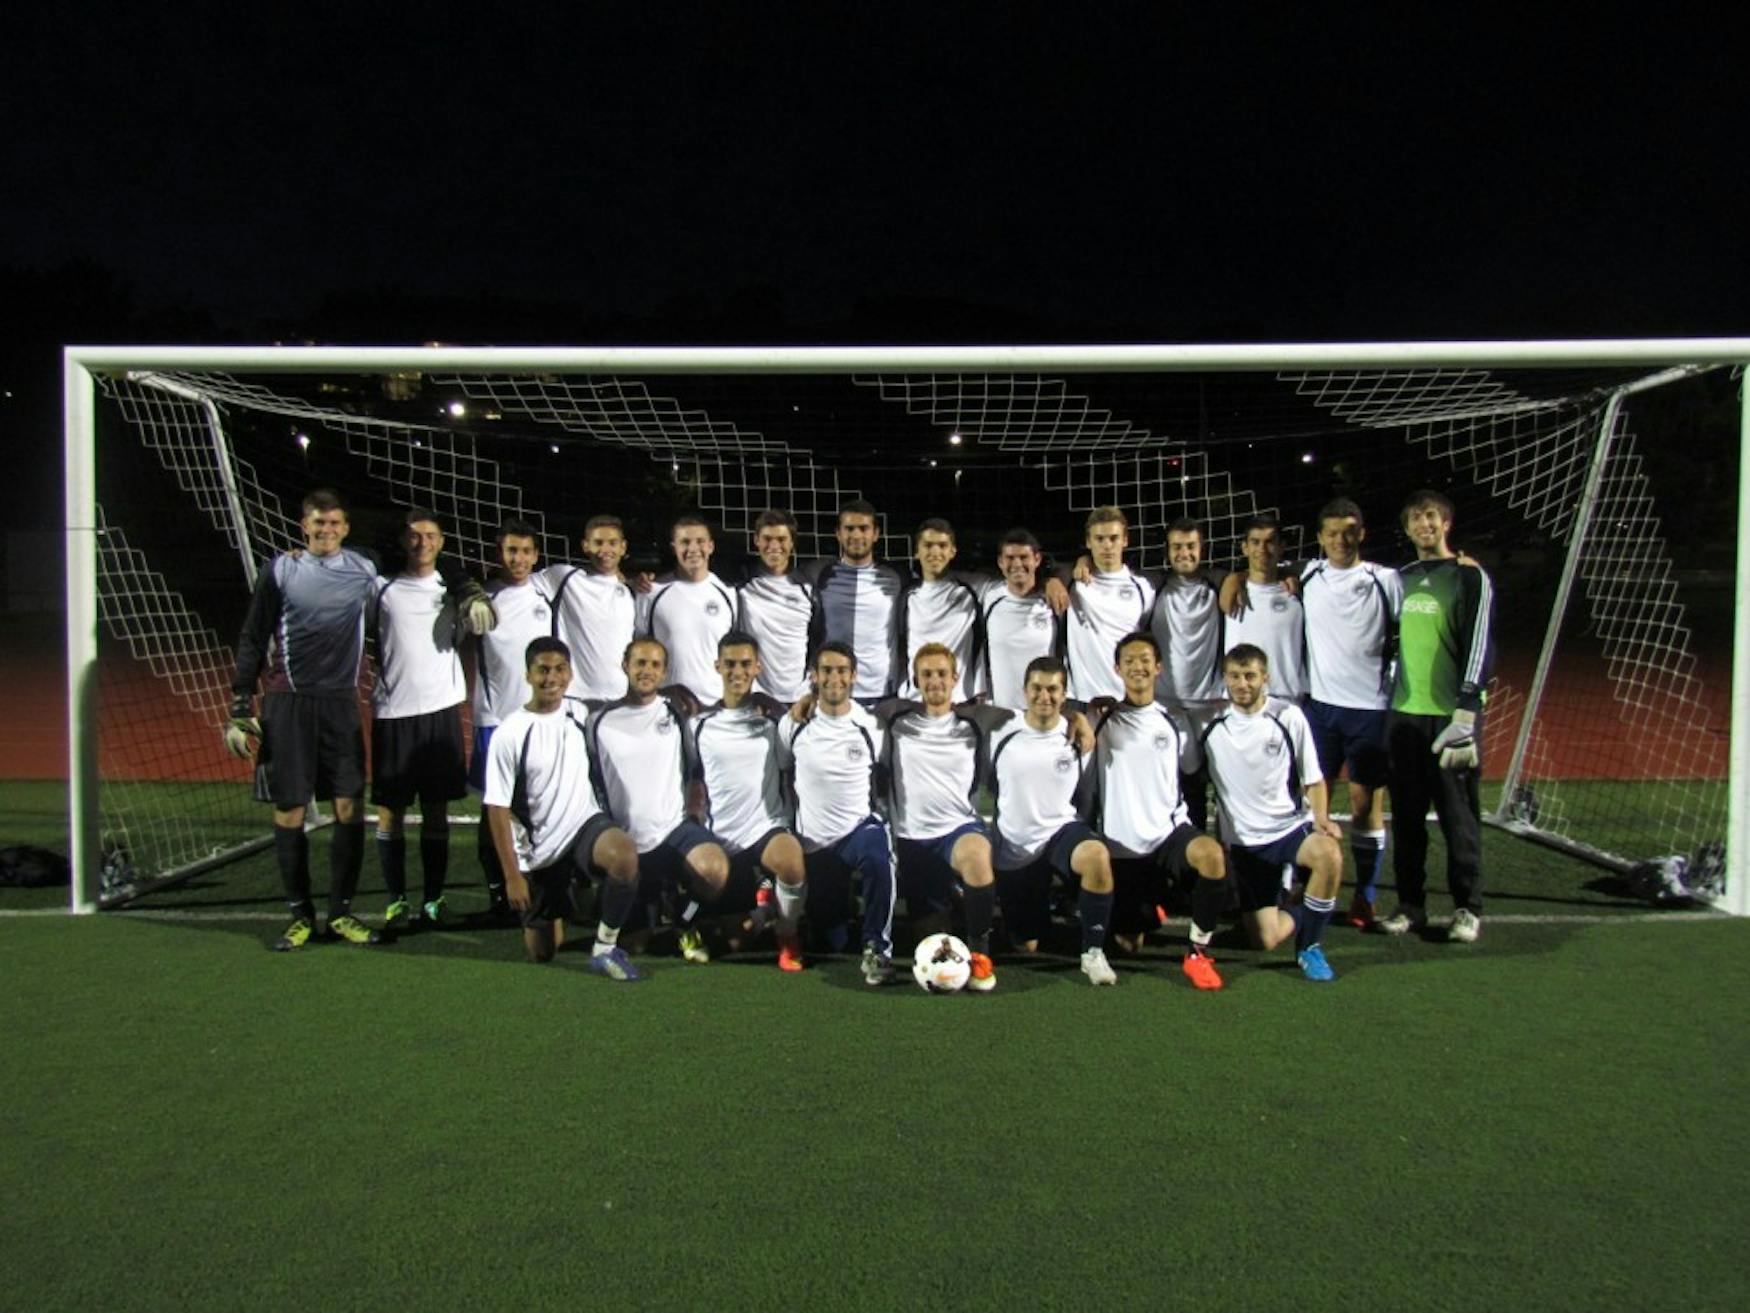 STRIKING A POSE: Members of the club soccer team Brandeis F.C., which uses soccer as an avenue for community service, sit for a team photograph on Gordon Field. Editor’s note: Sam Mintz ‘15 (front row, far right) is the deputy editor of the Justice.